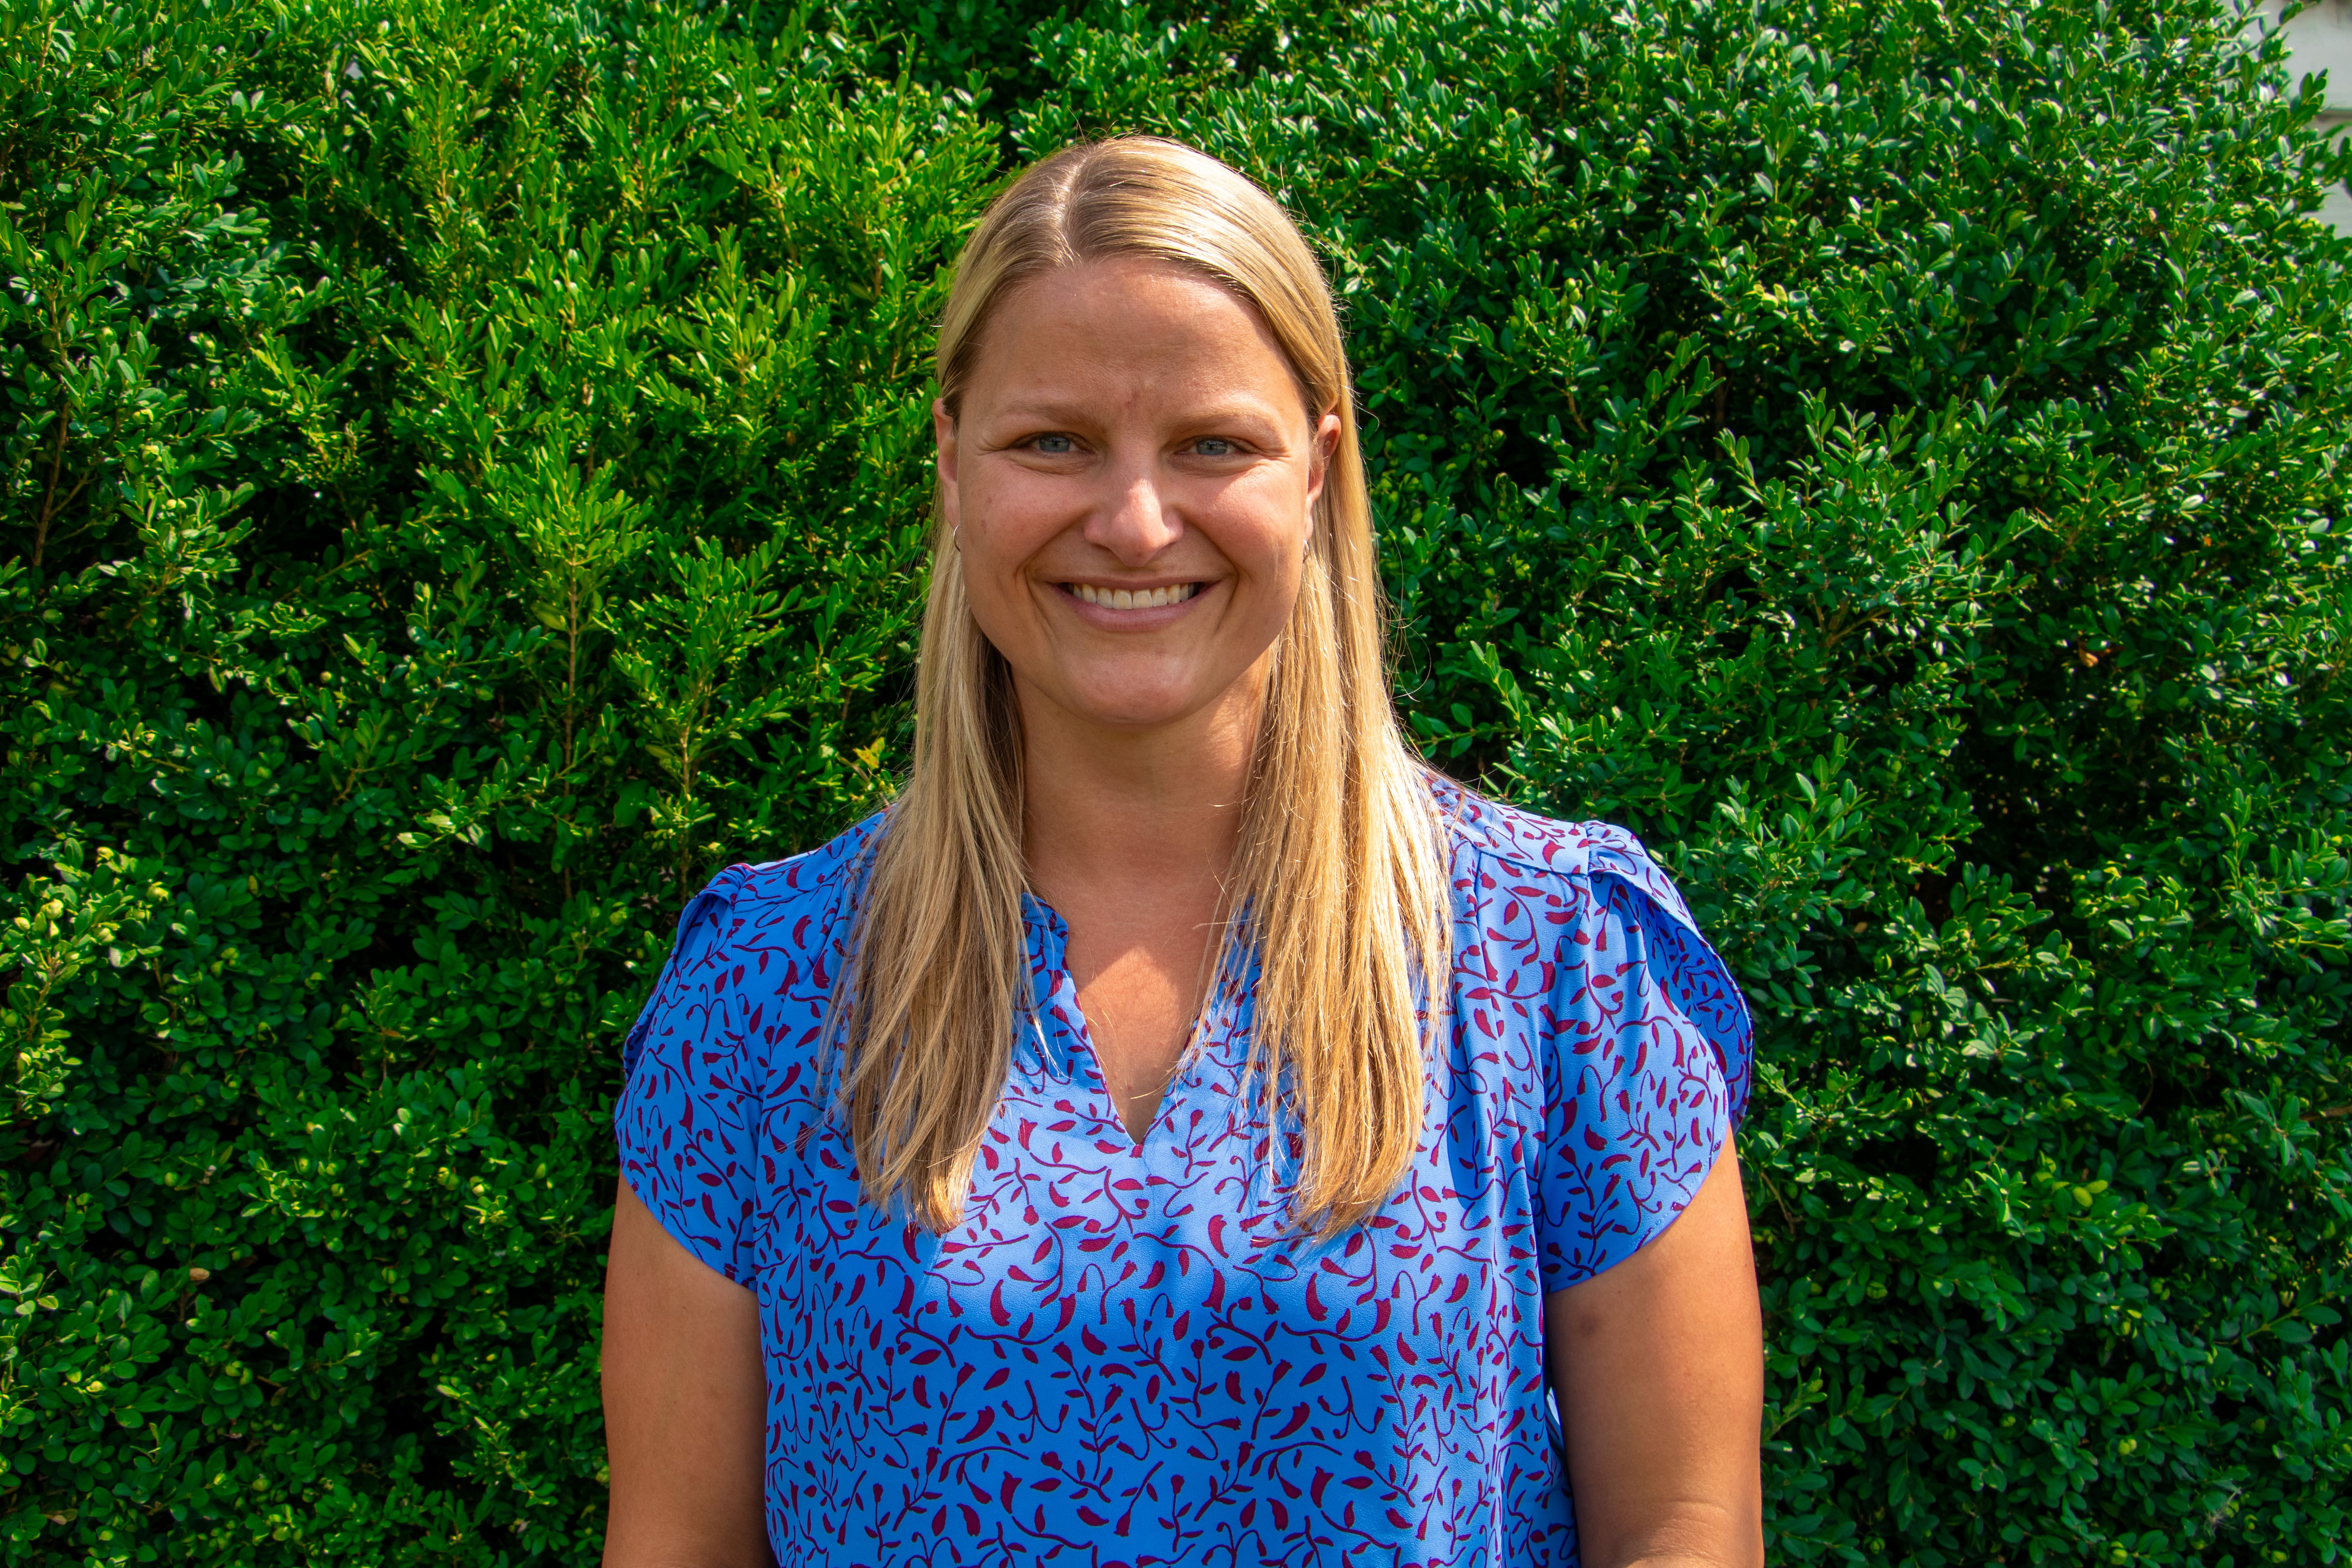 Gurnee Park District welcomes new recreation director